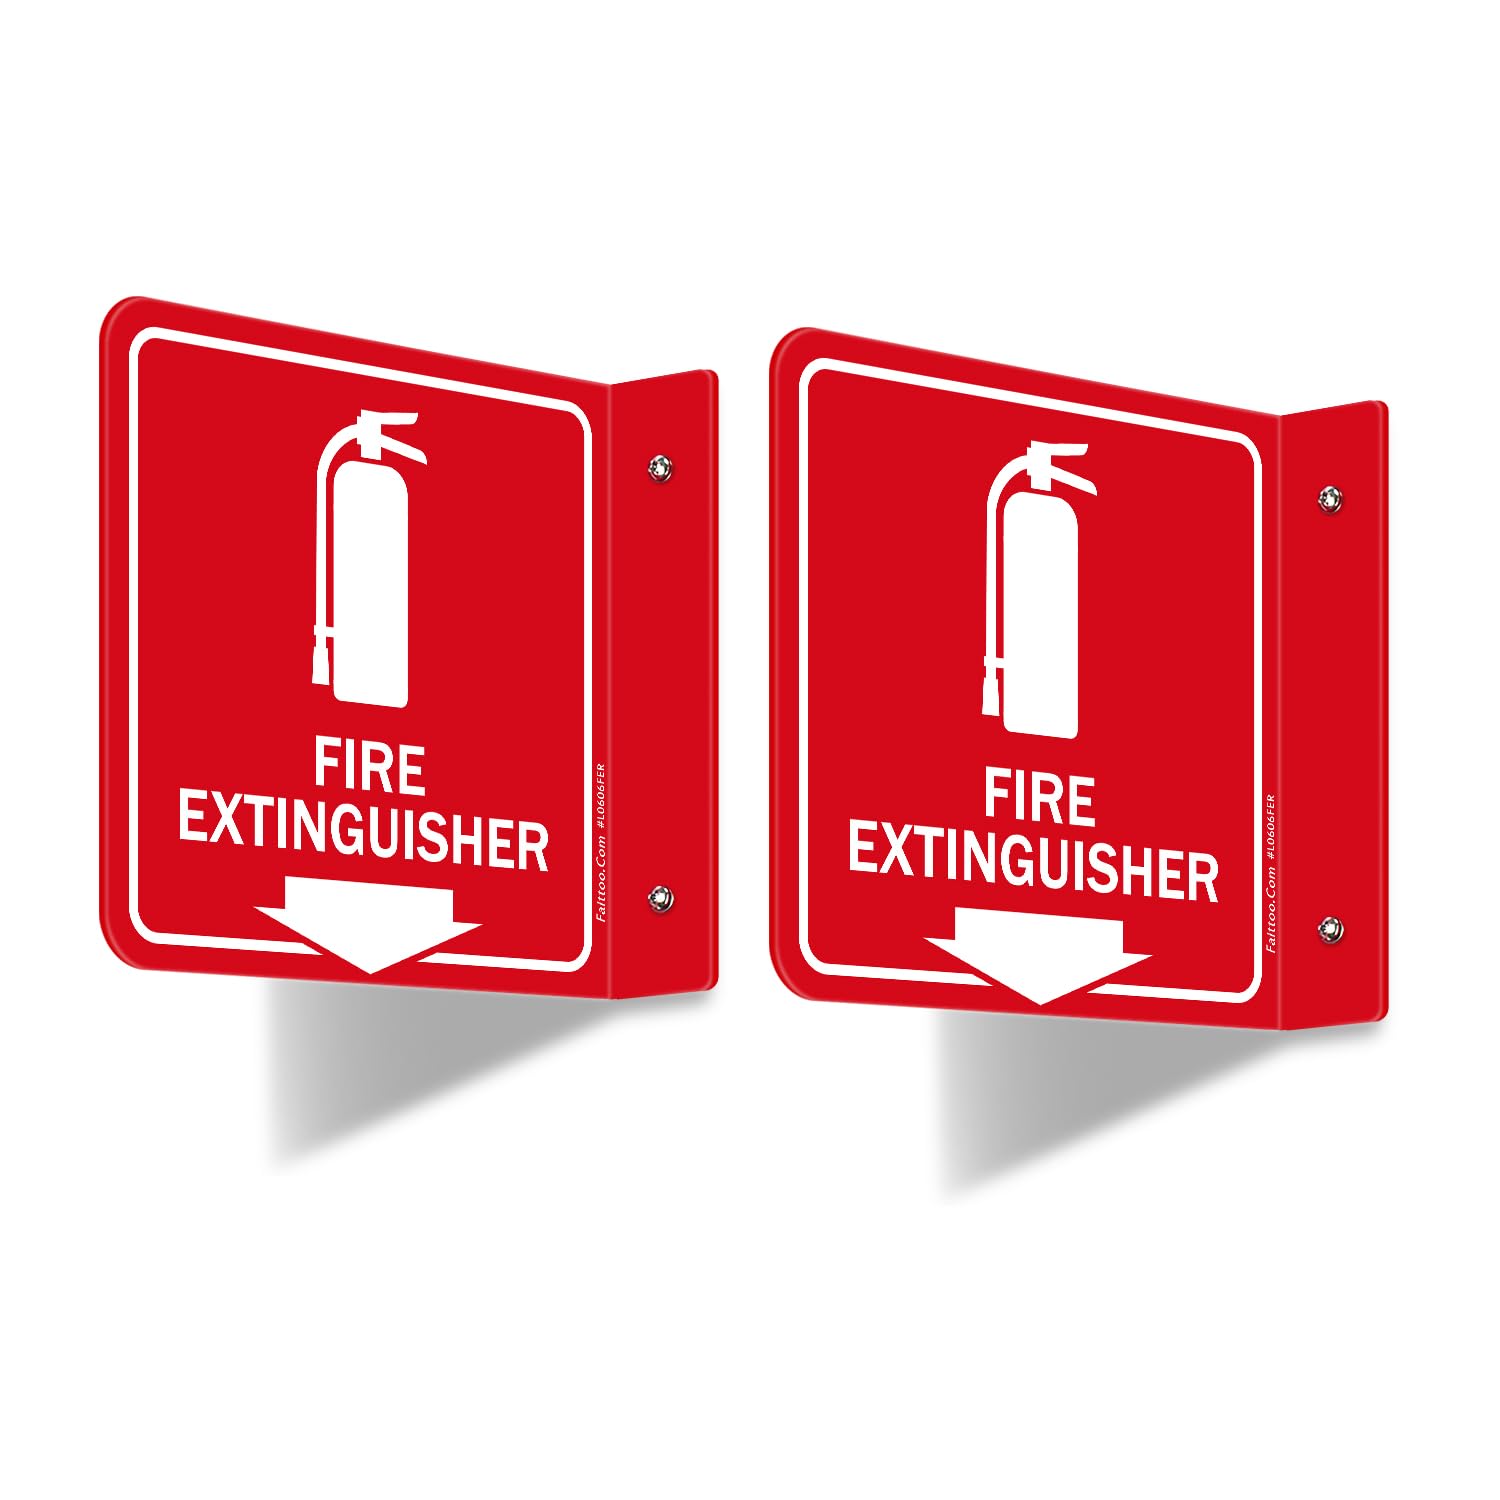 Faittoo Fire Extinguisher Sign, 2 Pack Fire Extinguisher with Down Arrow - 6 x 6 Inches Acrylic Plastic, 2 Pre-Drilled Holes, Includes Matching Screws, Use for Home Office/Business